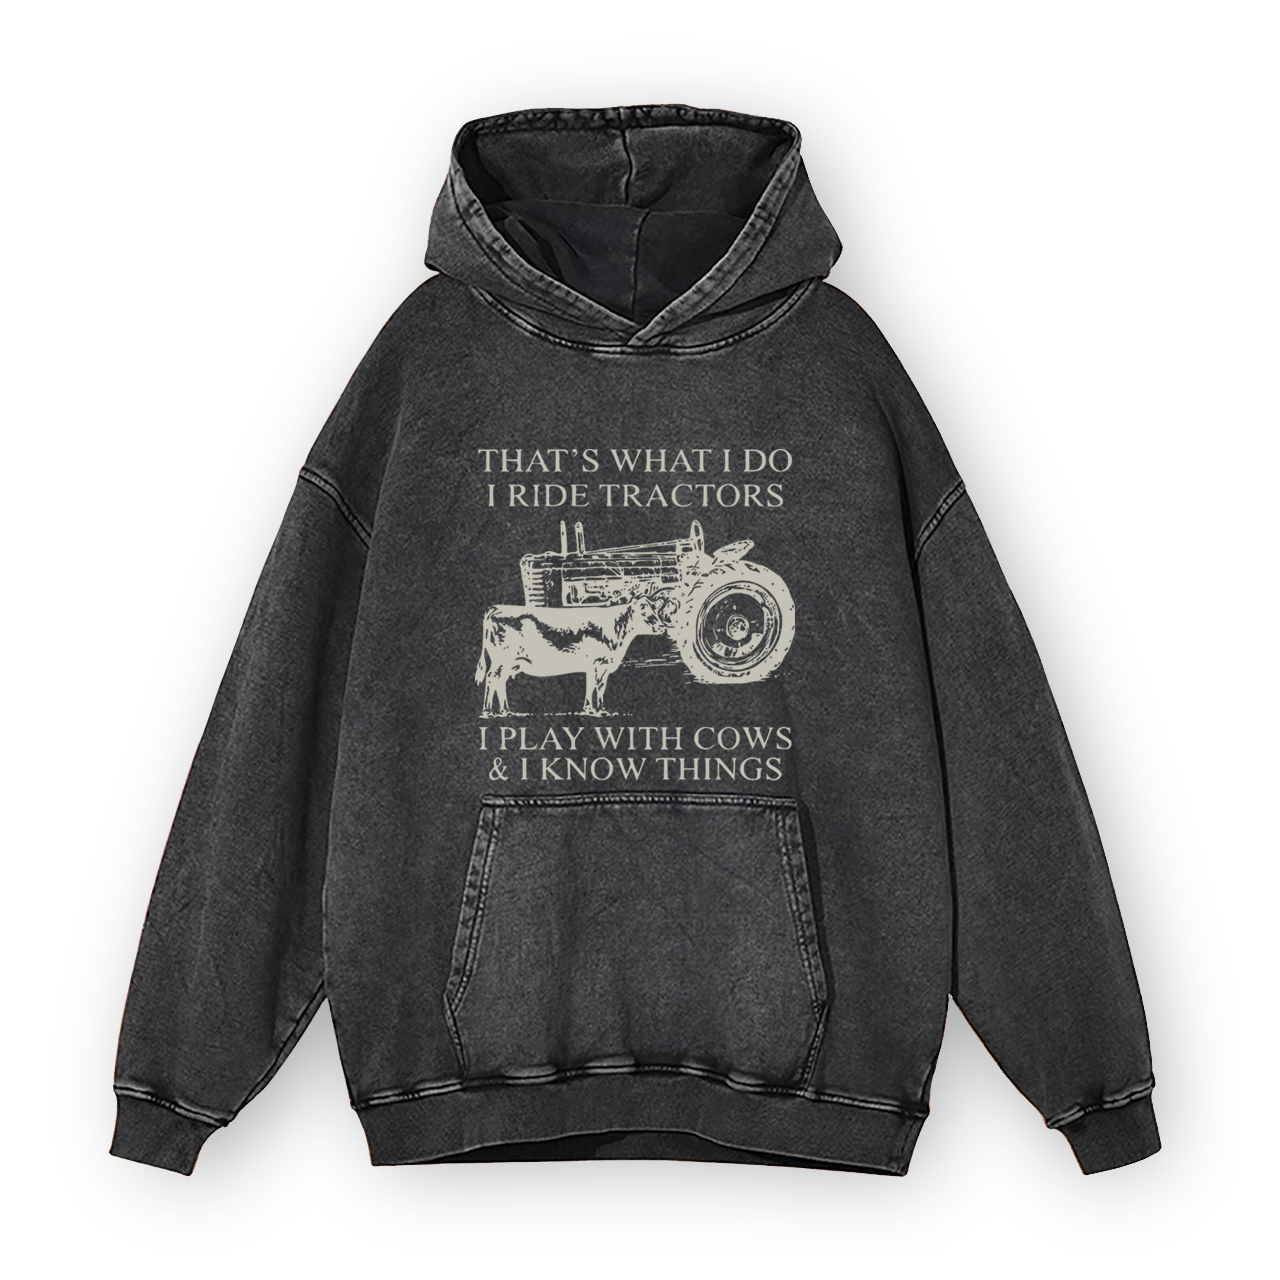 That's What I Do I Ride Tractors And I Play With Cows Garment-Dye Hoodies